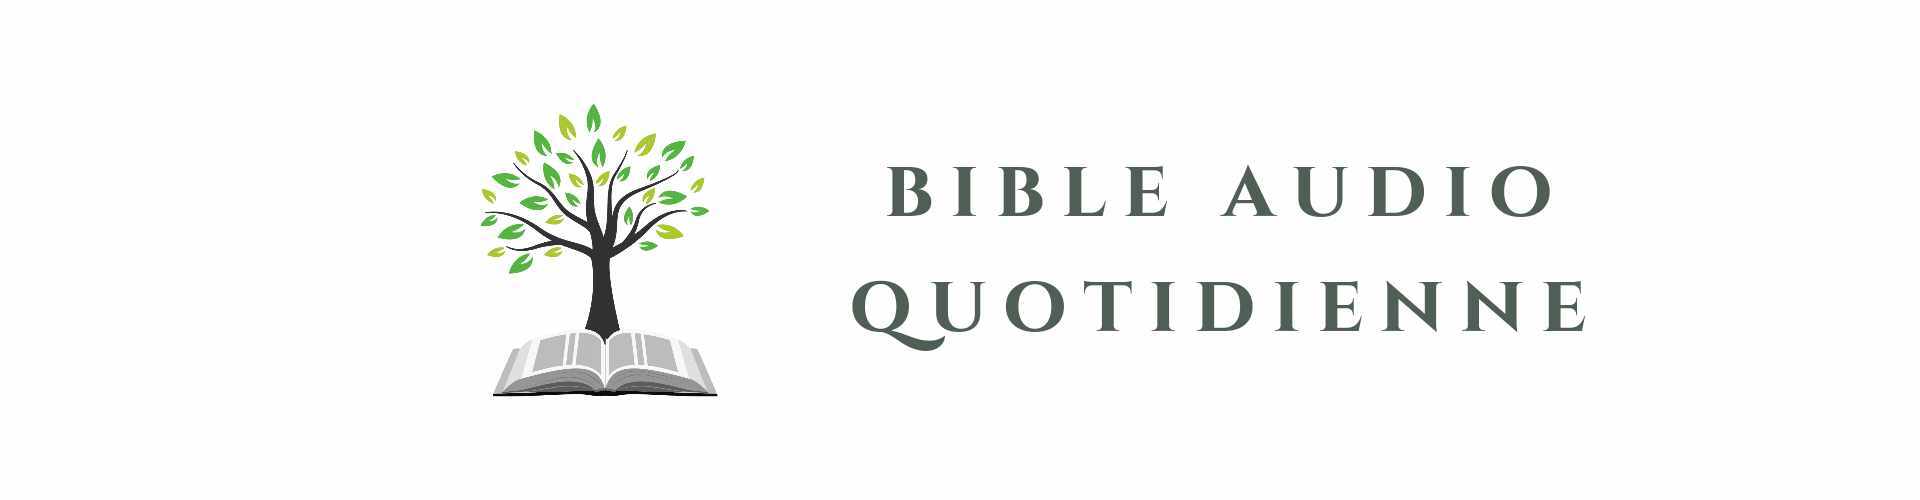 Bible Audio Quotidienne (French Audio Bible)